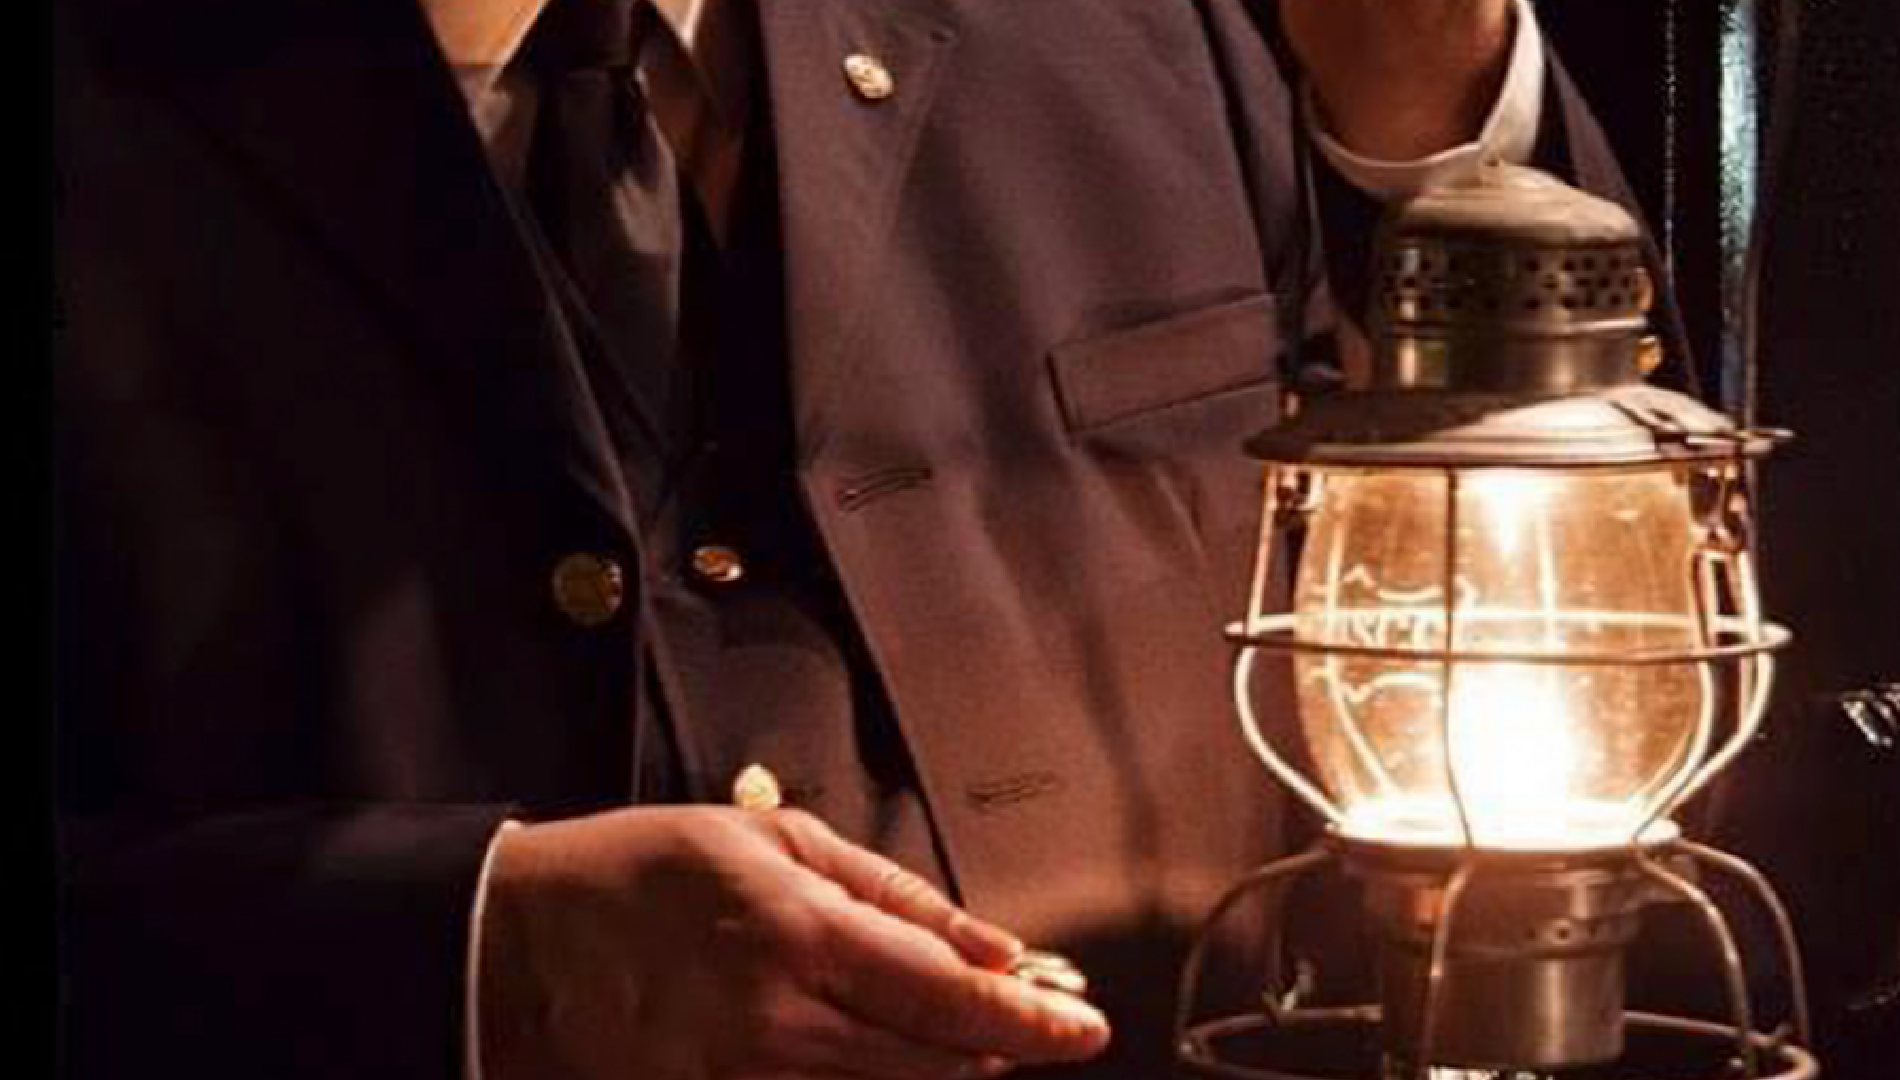 Conductor Checking His Watch by lantern light